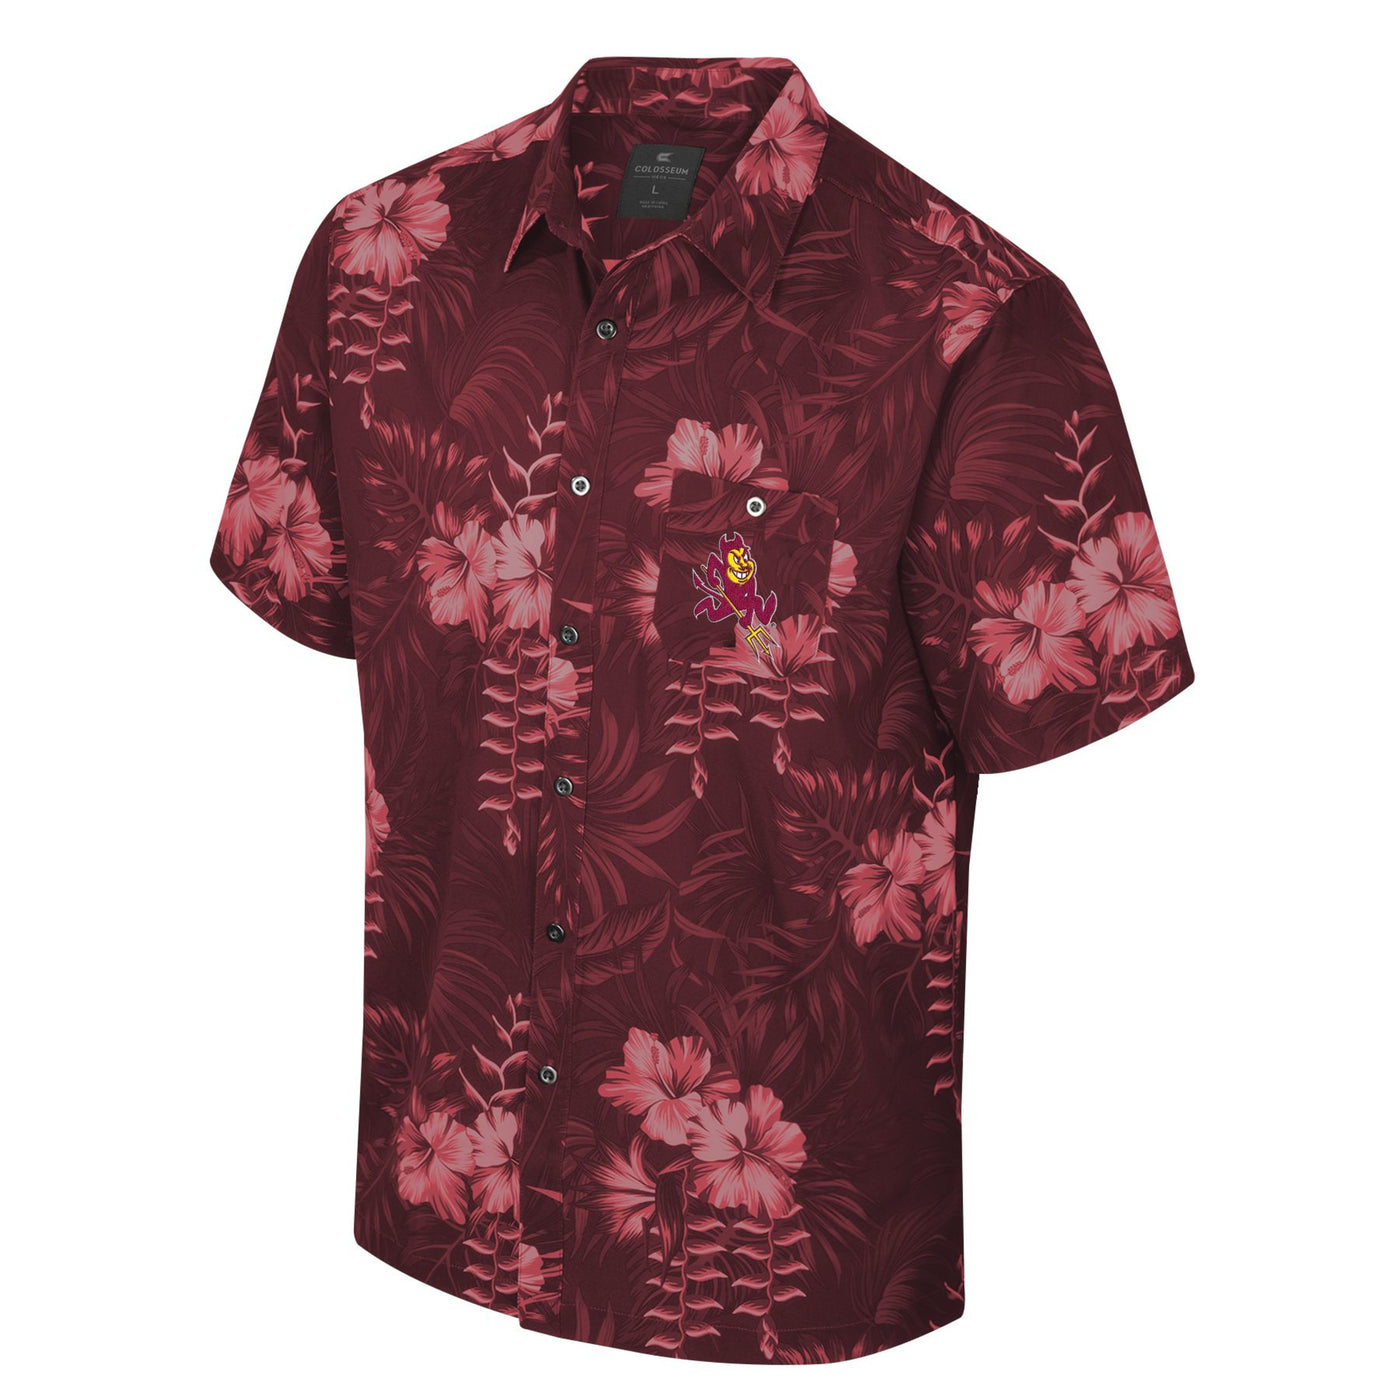 ASU maroon button up shirt with an all over light maroon floral print.There is a small pocket on the left  side of the chest with a small sparky mascot.